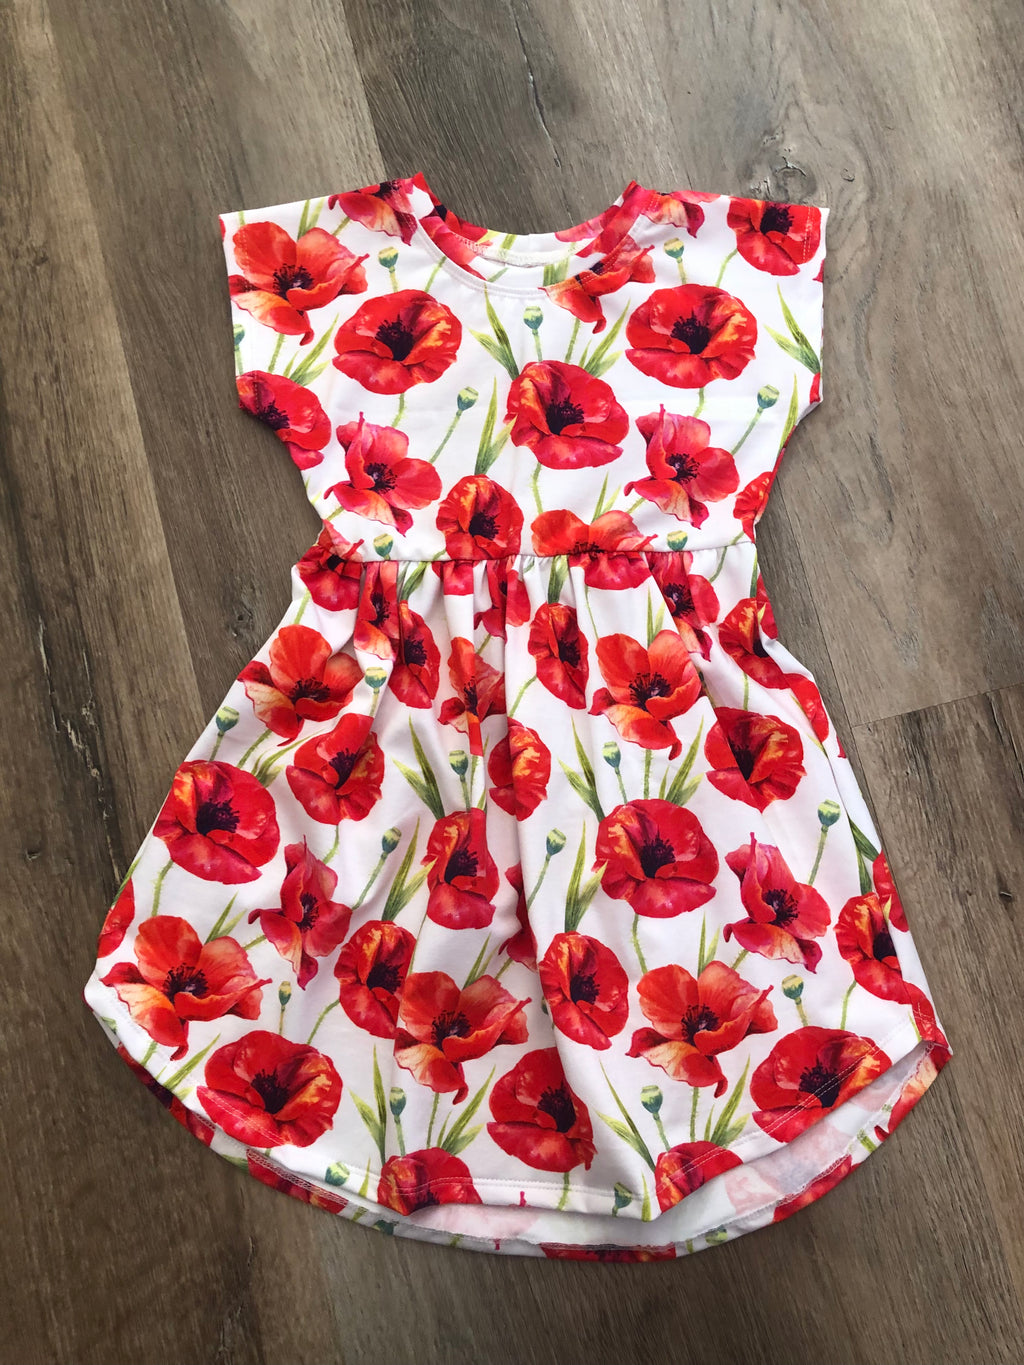 Poppies Pearlie Dress size 5